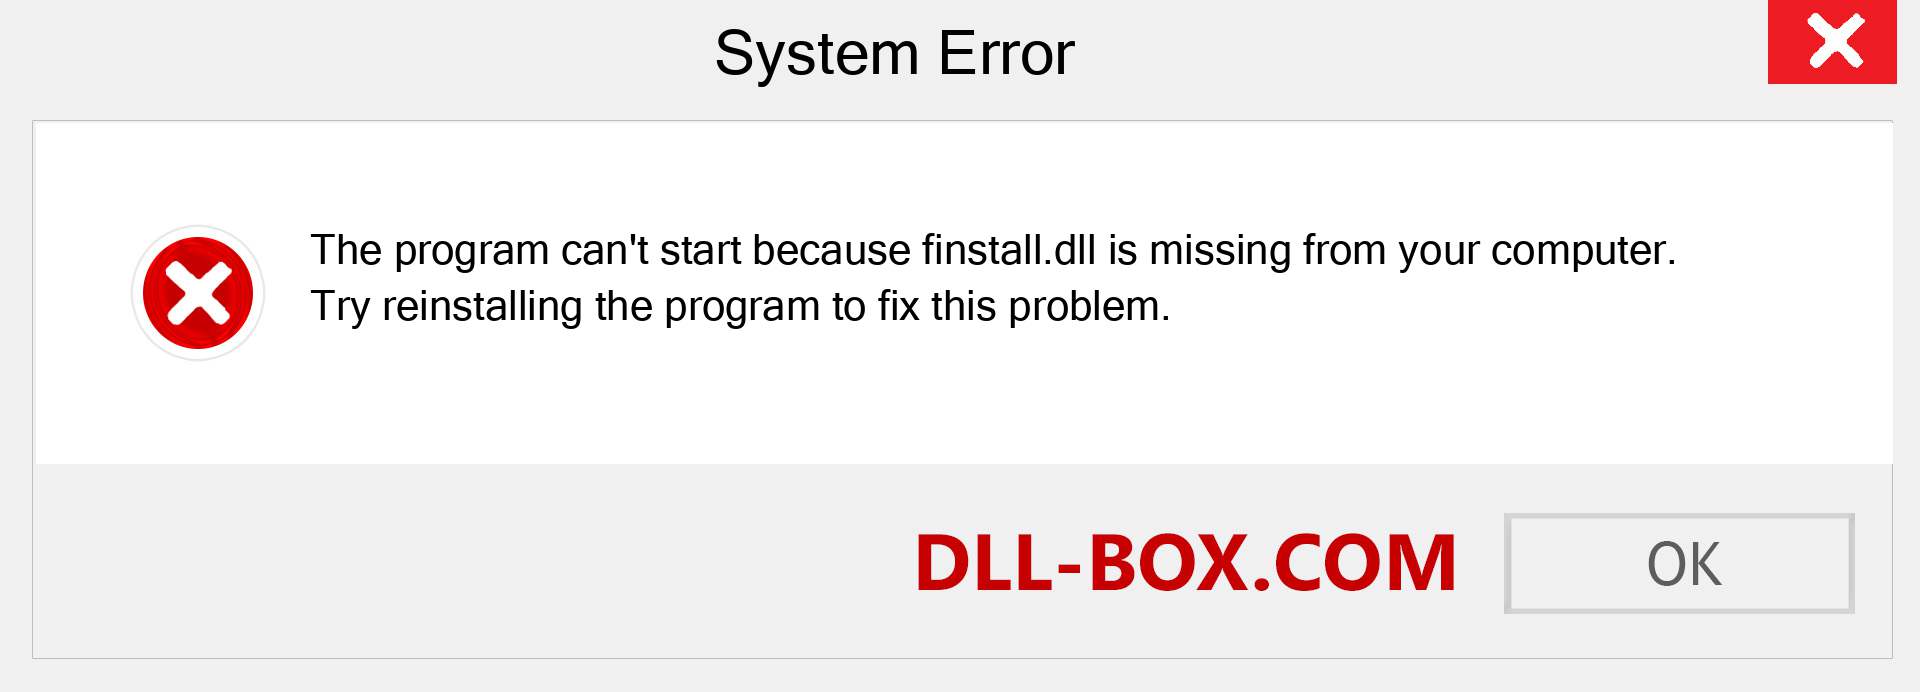  finstall.dll file is missing?. Download for Windows 7, 8, 10 - Fix  finstall dll Missing Error on Windows, photos, images